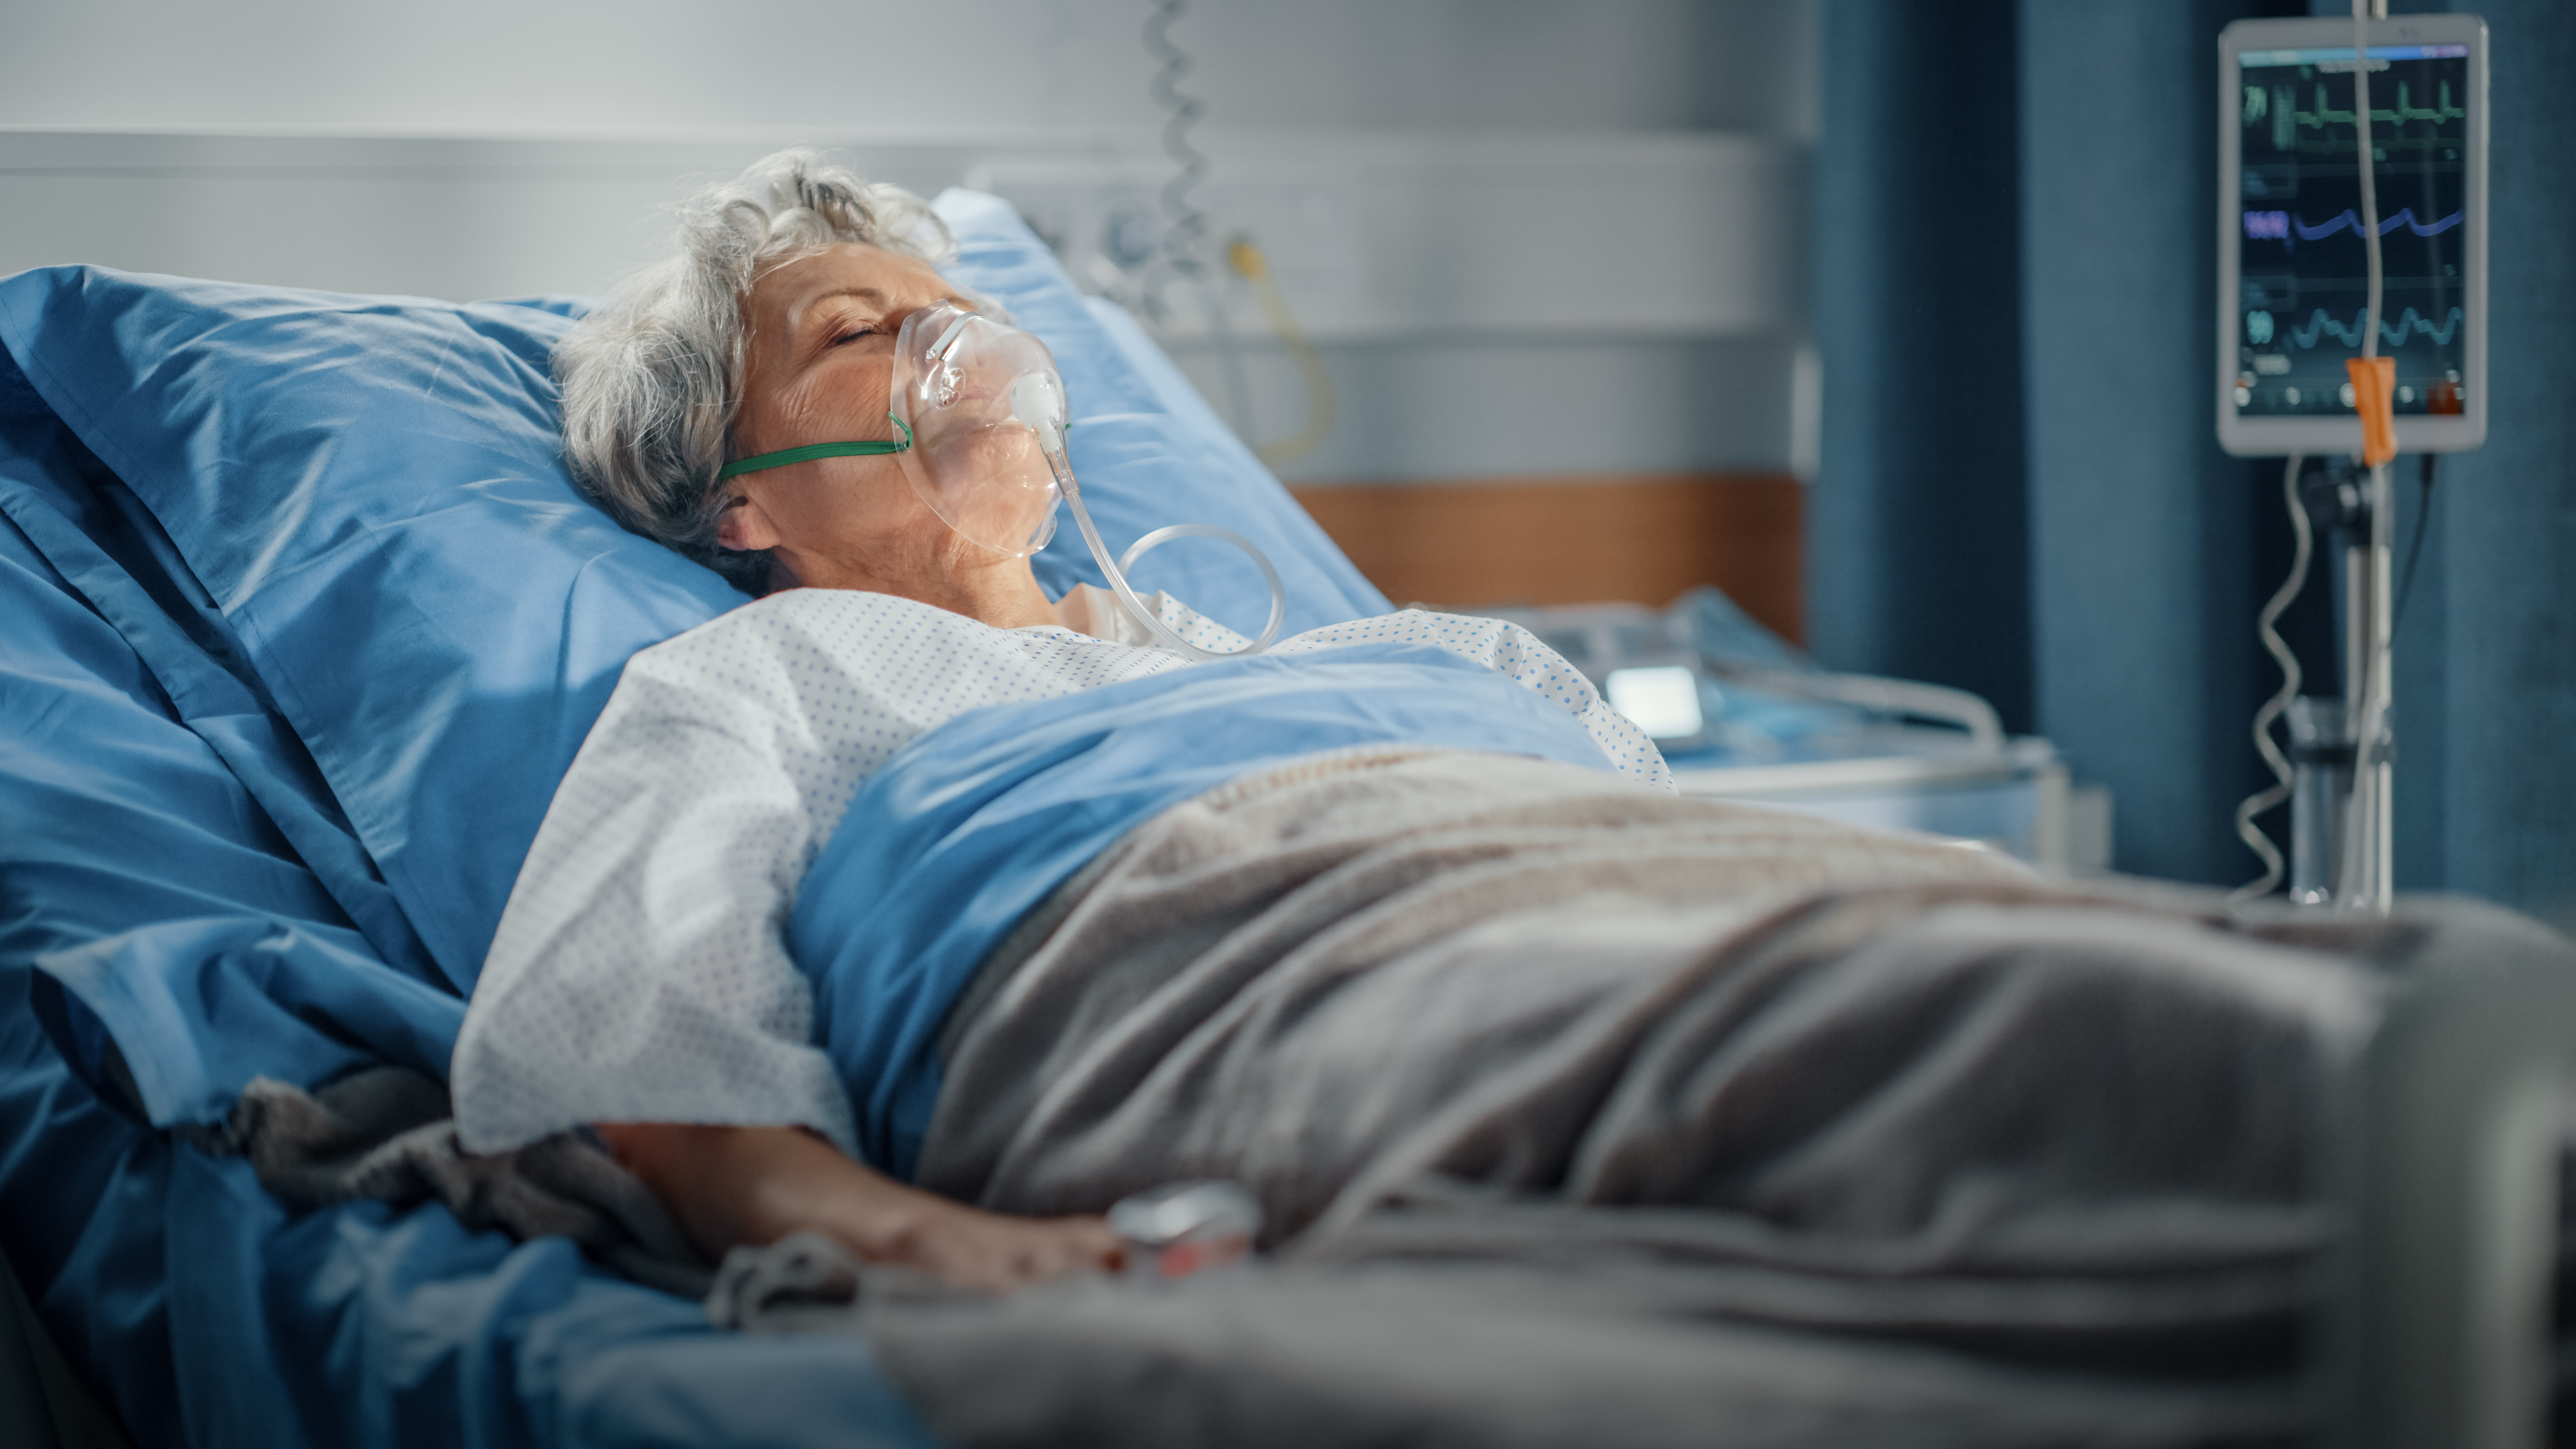 An older woman in a hospital bed | Source: Shutterstock